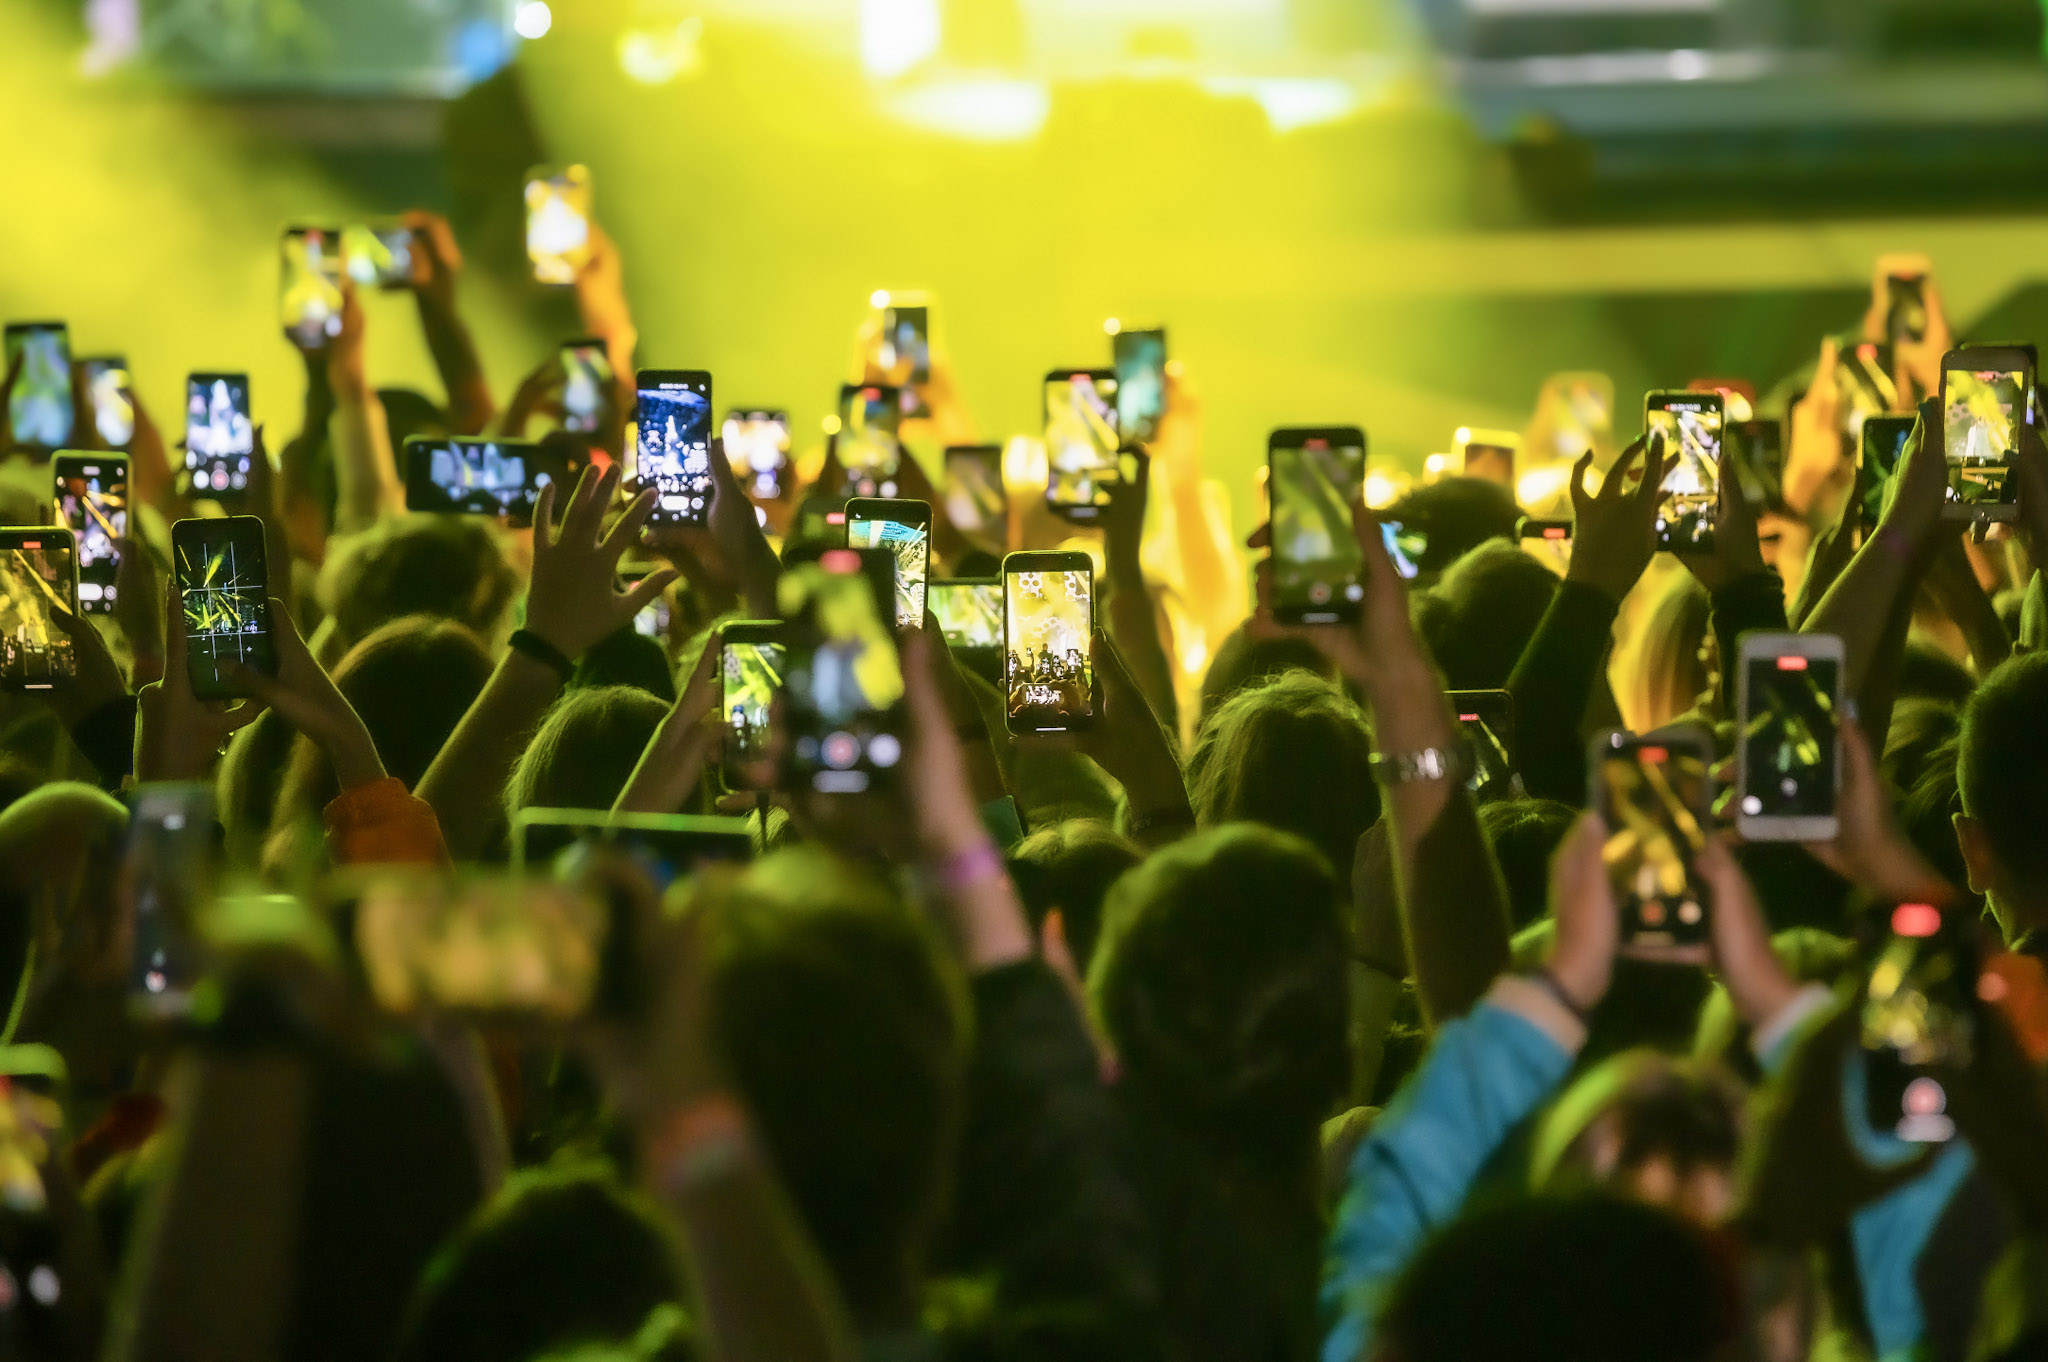 stock photo of a crowd of people holding up their phones at a concert